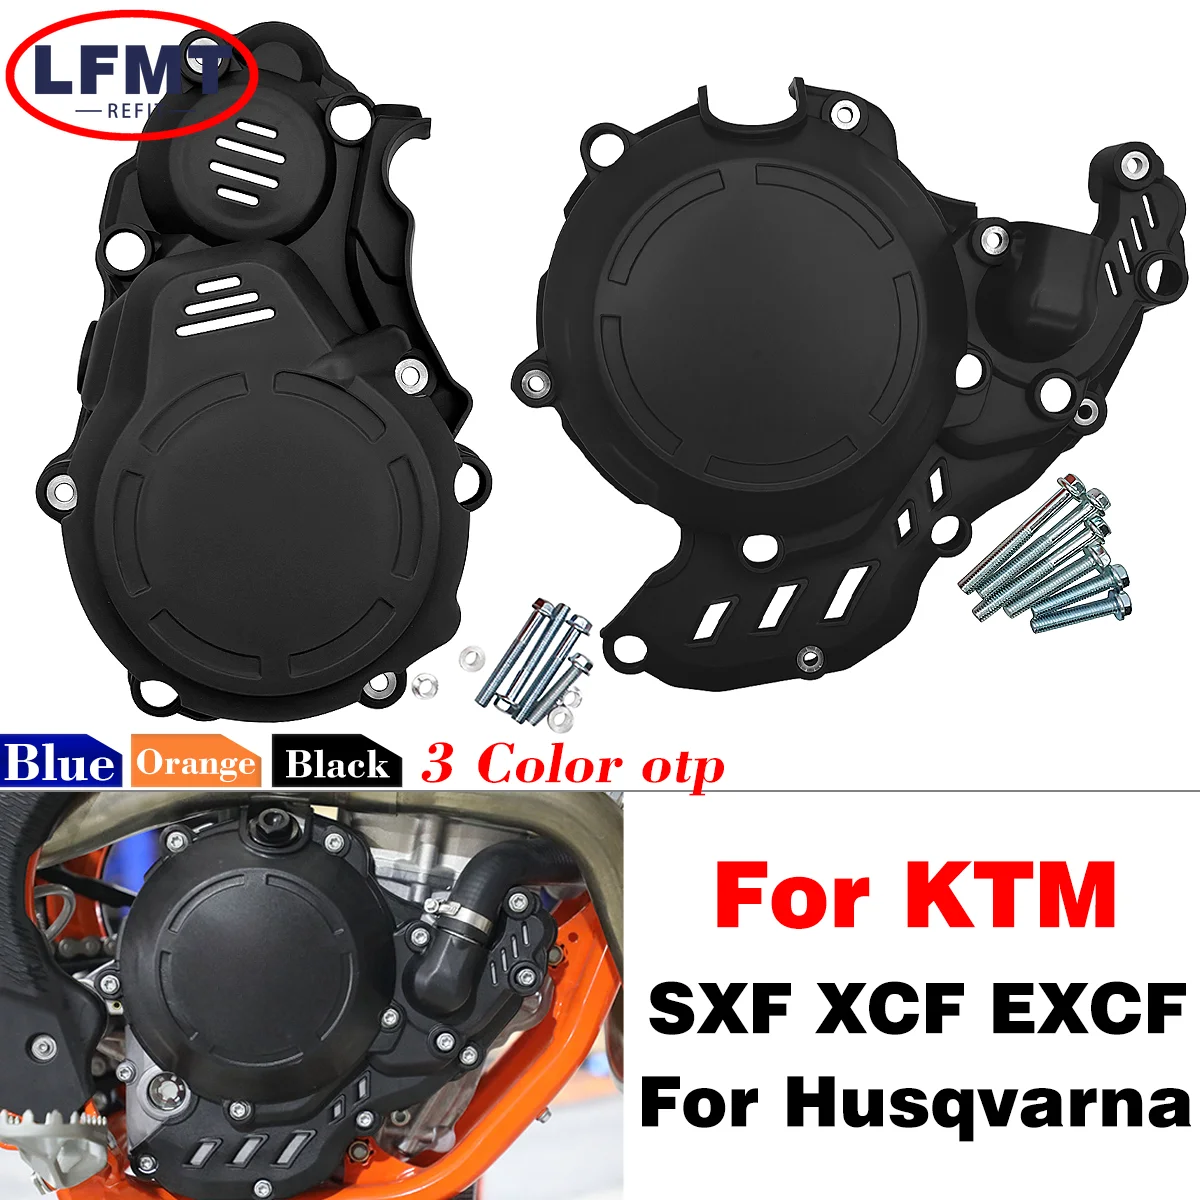 

Ignition Clutch Cover Guard Protector For KTM EXCF SXF XCF XCFW 250 350 FREERIDE 4T EXC-F SX-F XC-F XCF-W For Husqvarna FC FE FX